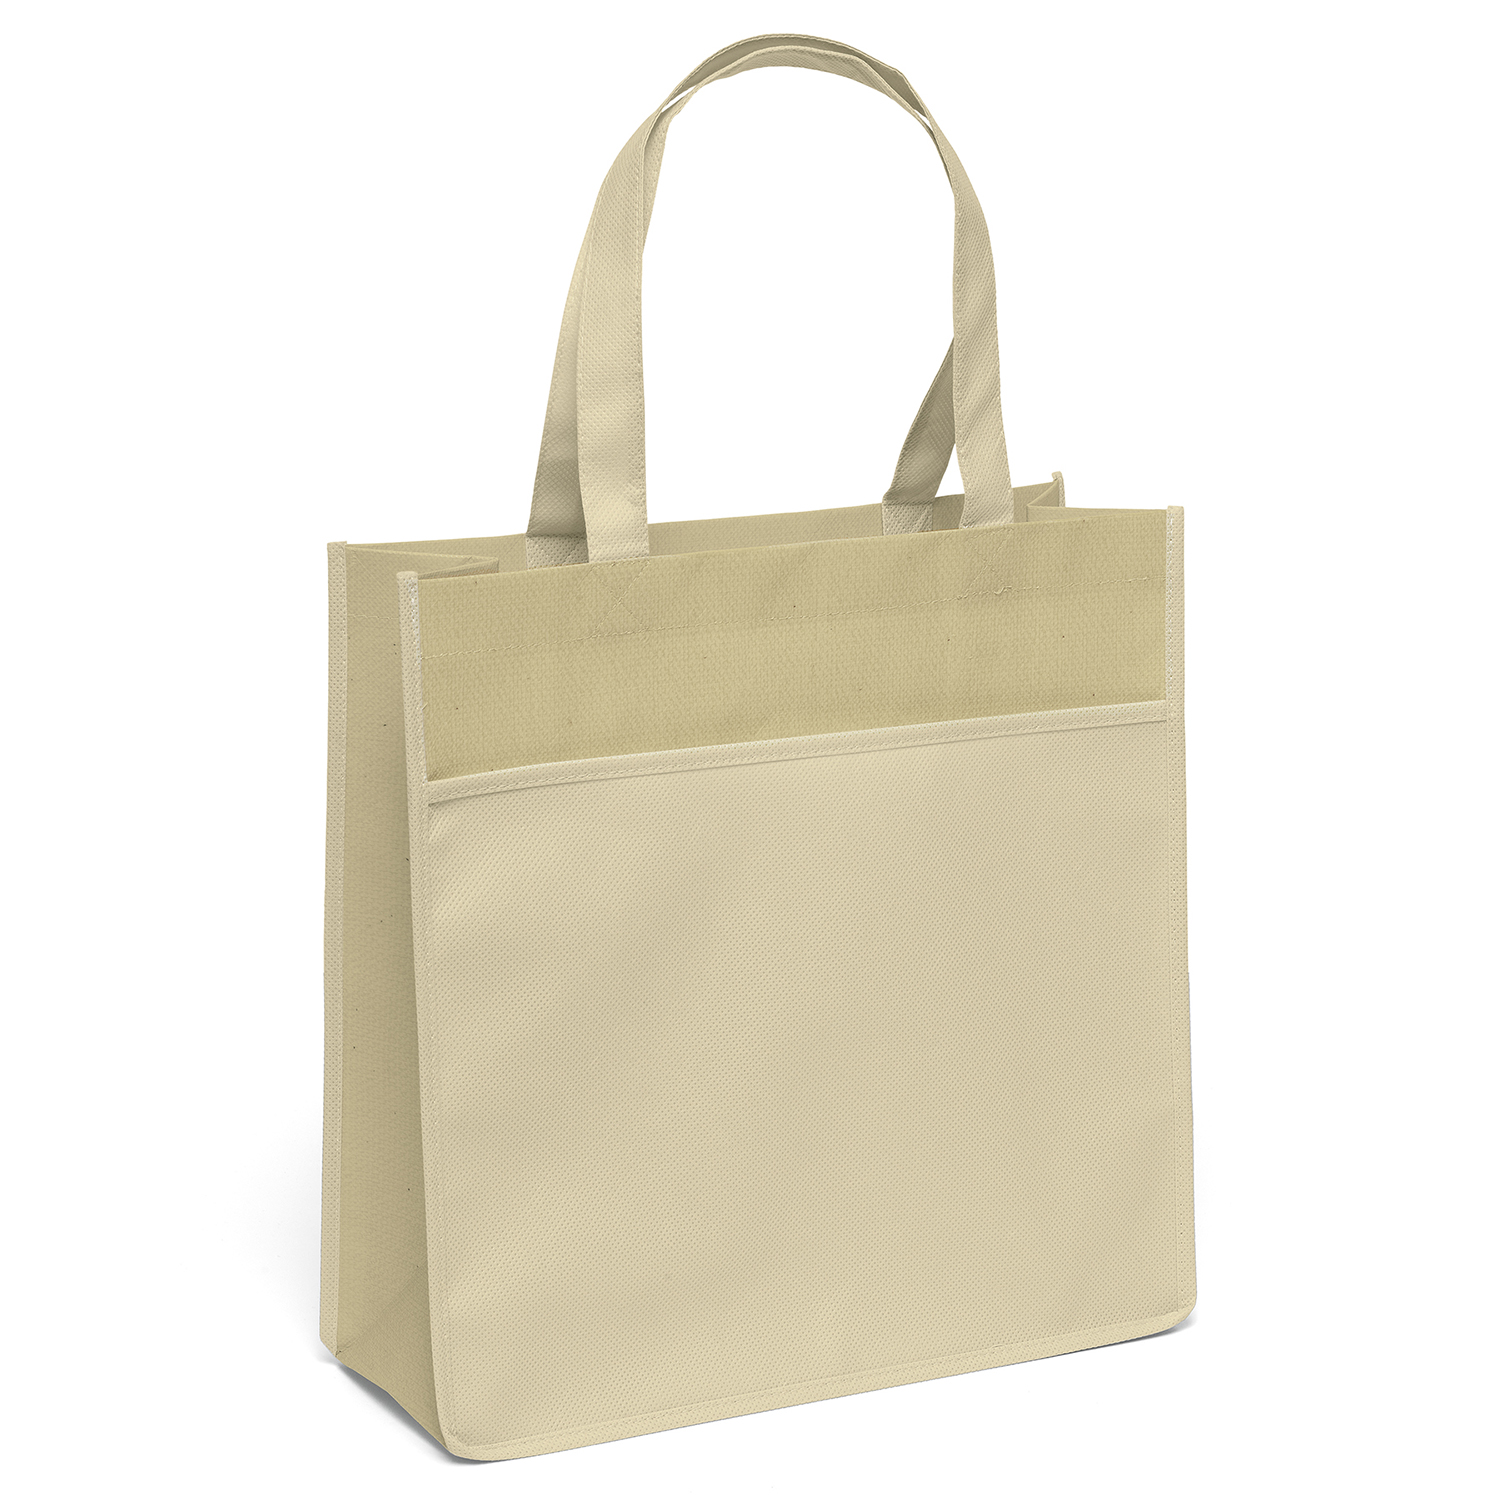 Bag Makers CVLPNAS1313 - Custom Printed Eco-Friendly Promotional Non-Woven Grocery Tote Bag